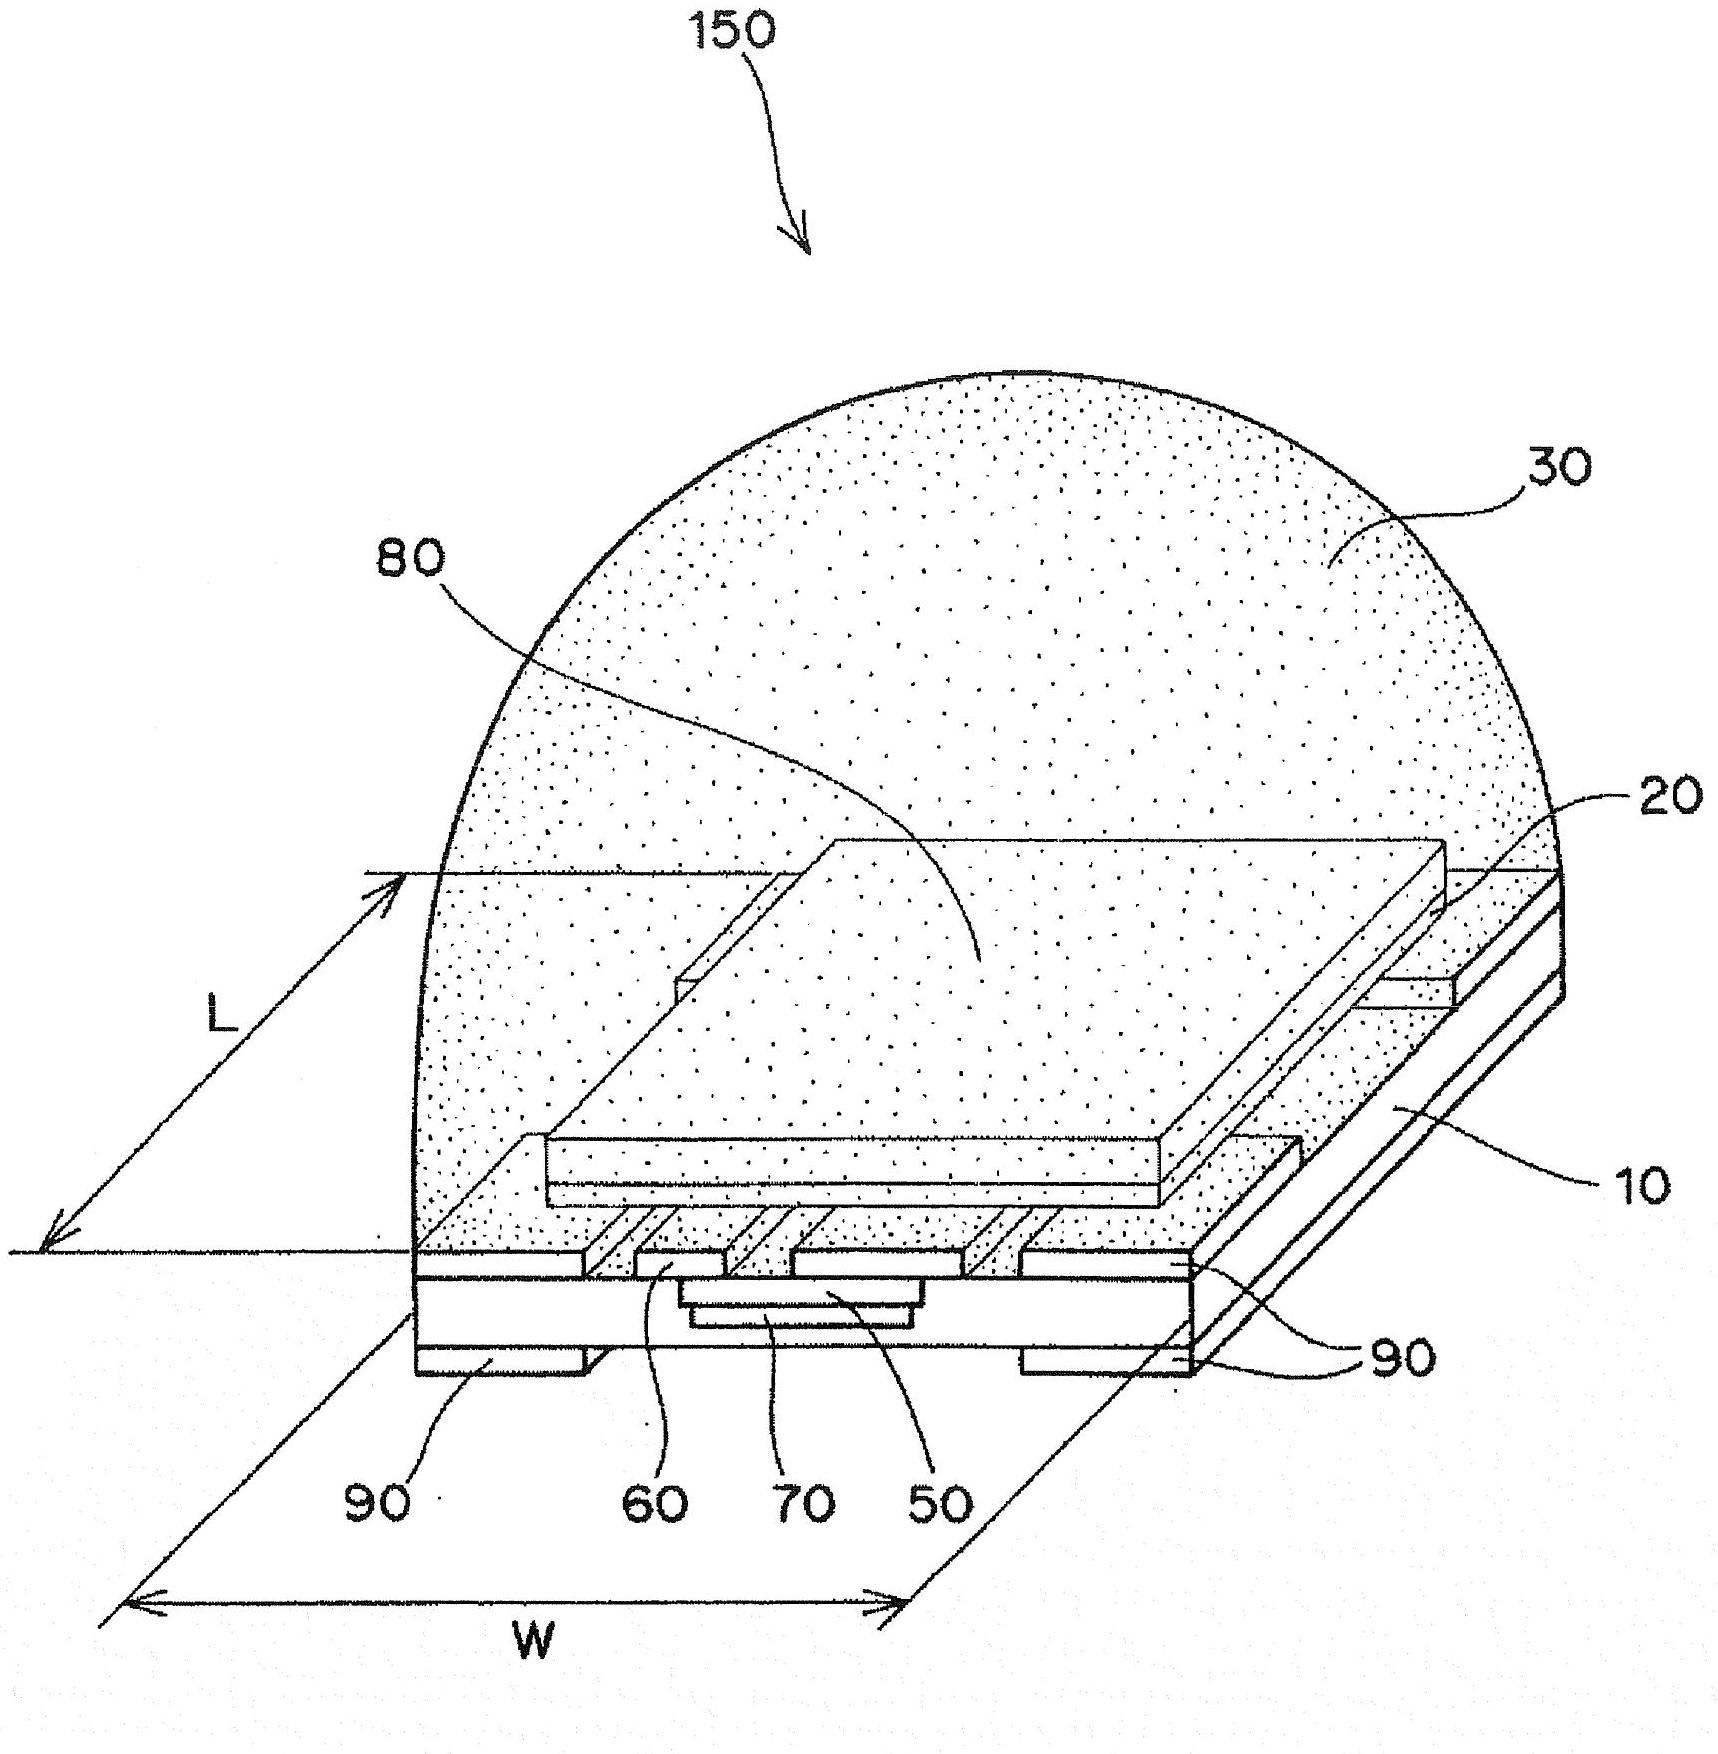 Substrate for light emitting element, method for manufacturing same, and light emitting device